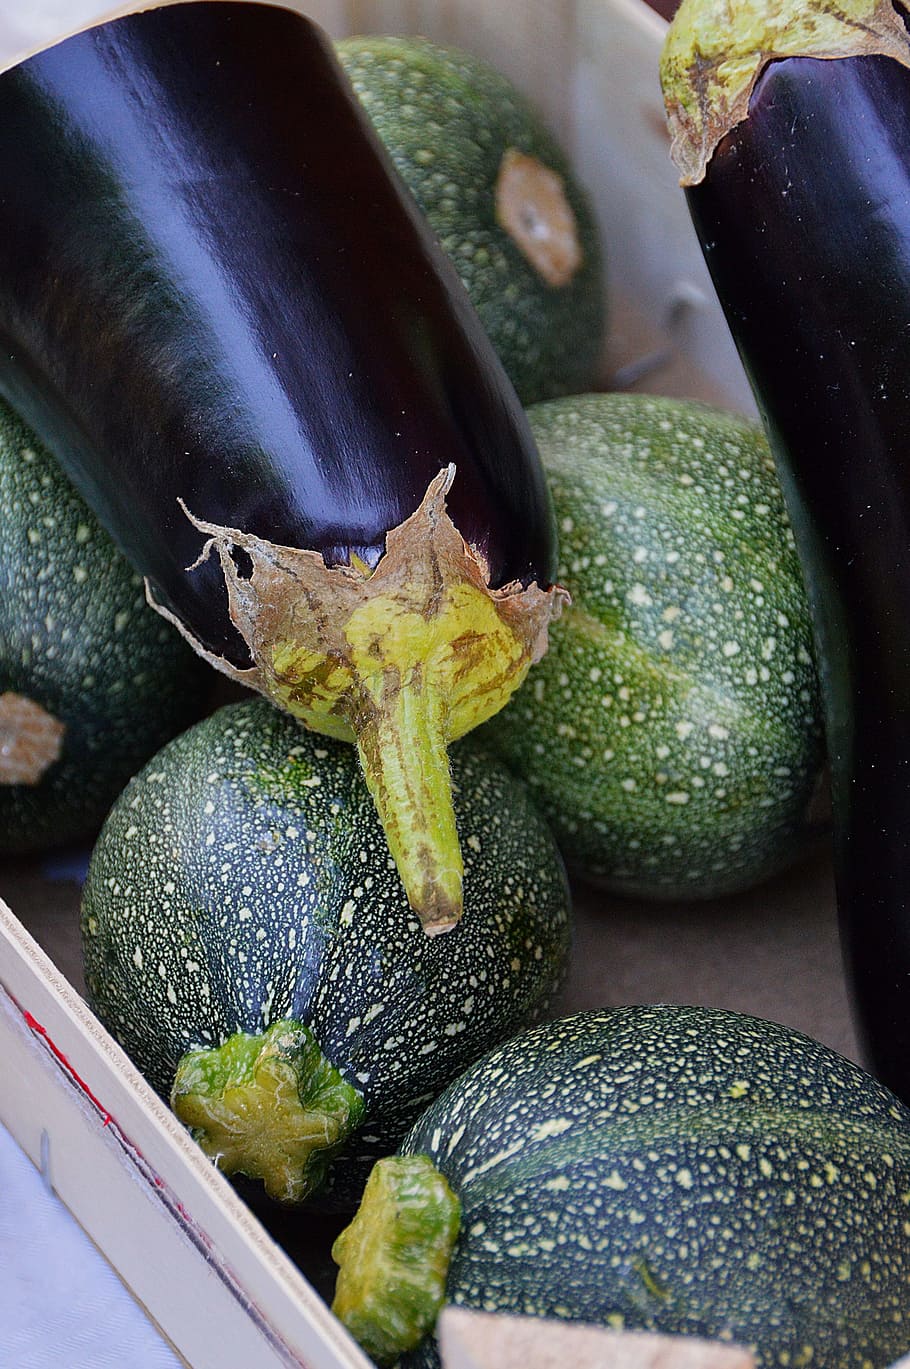 zucchini, vegetables, green, healthy, food, crop, nature, plant, vegetable meal, kitchen